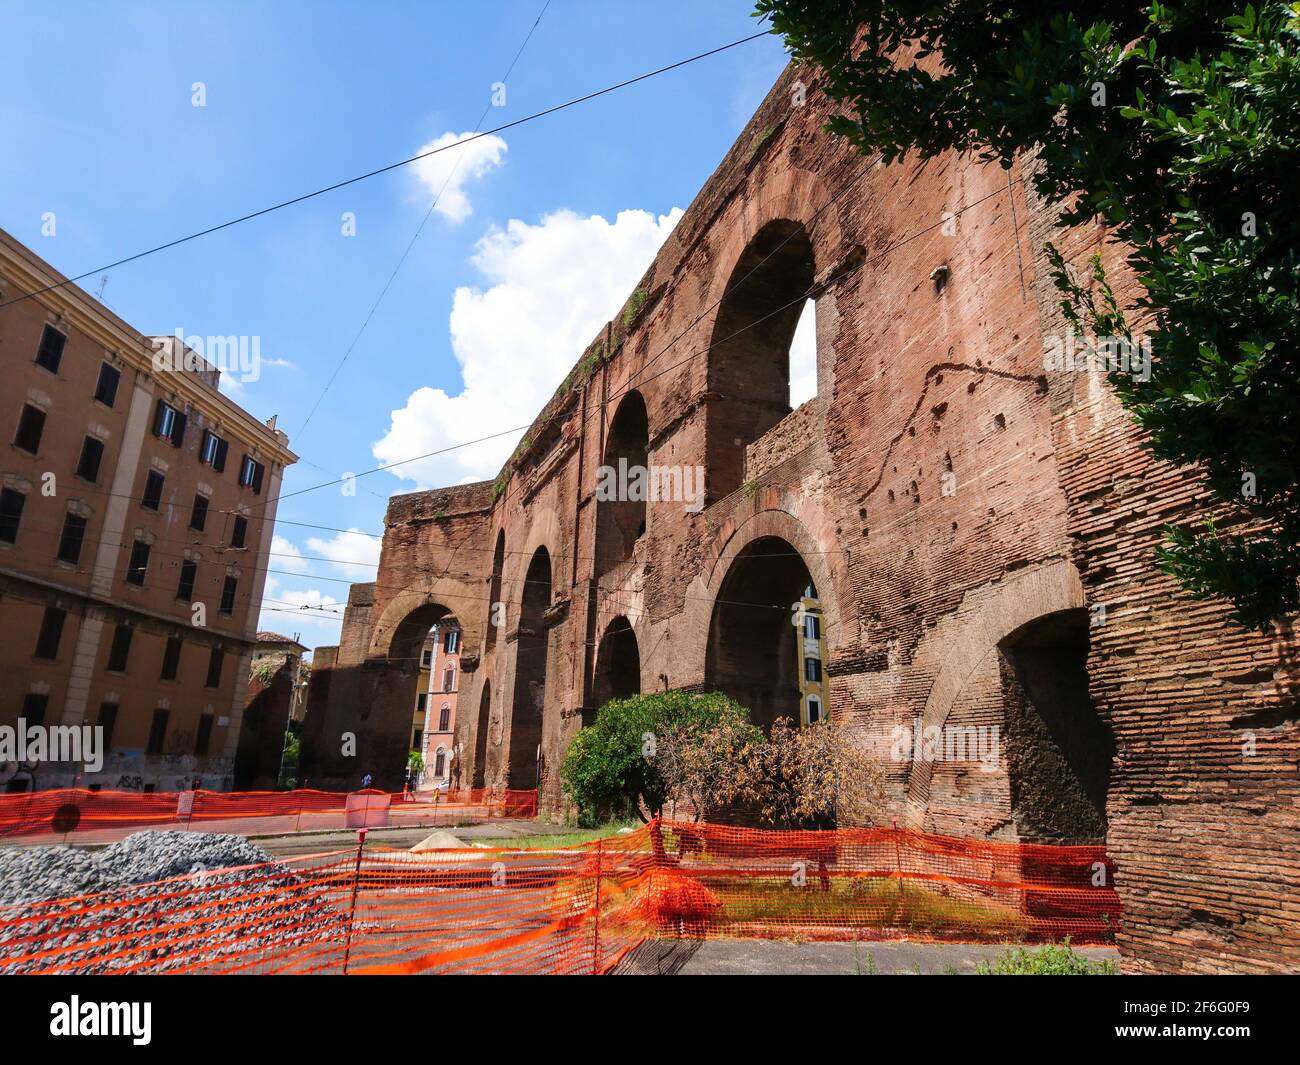 Two aqueducts in process of reconstruction near Larger Gate or Porta Maggiore. Ancient 3rd-century Rome's city walls. Rome historical sights, Italy Stock Photo